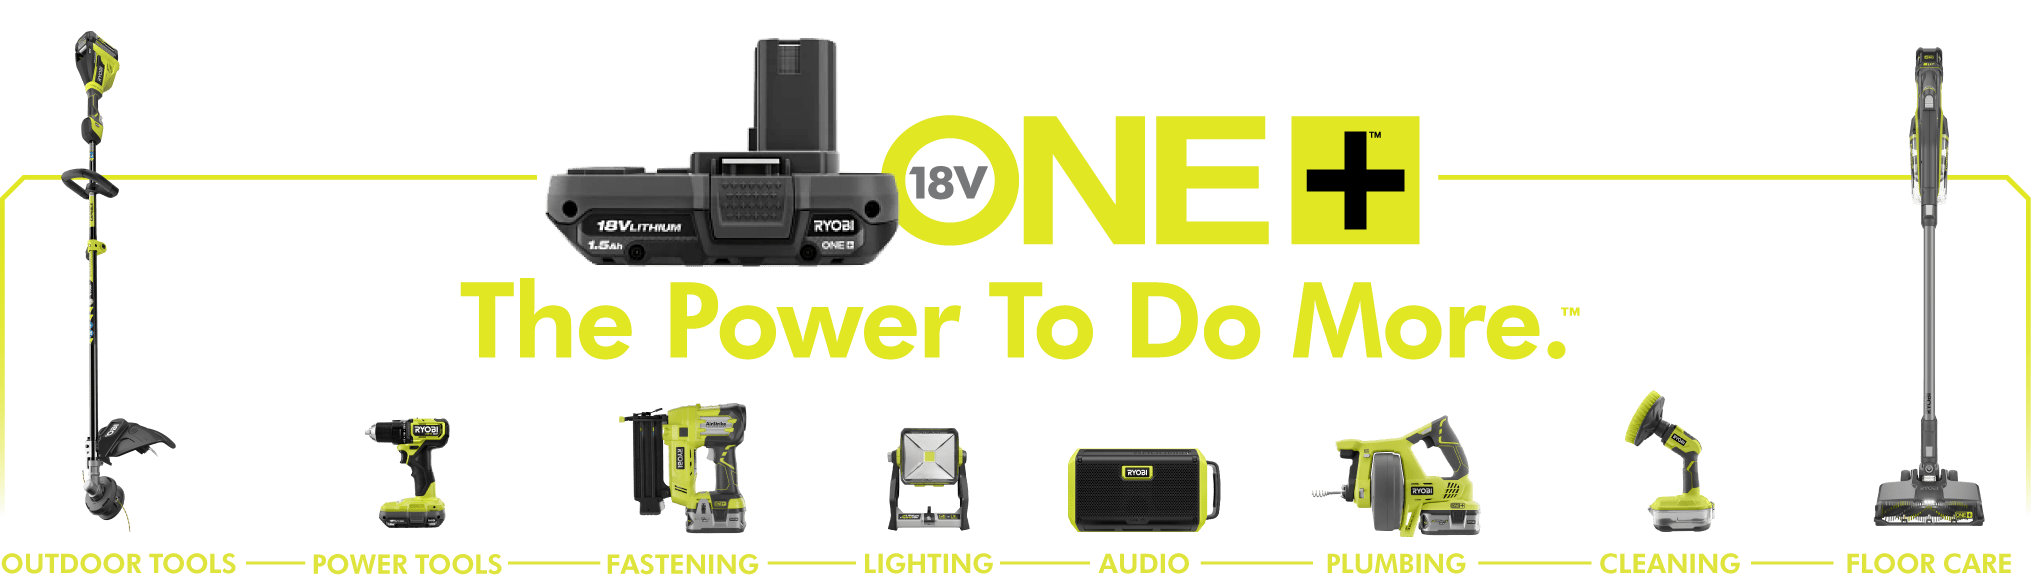 One+ The Power To Do More.